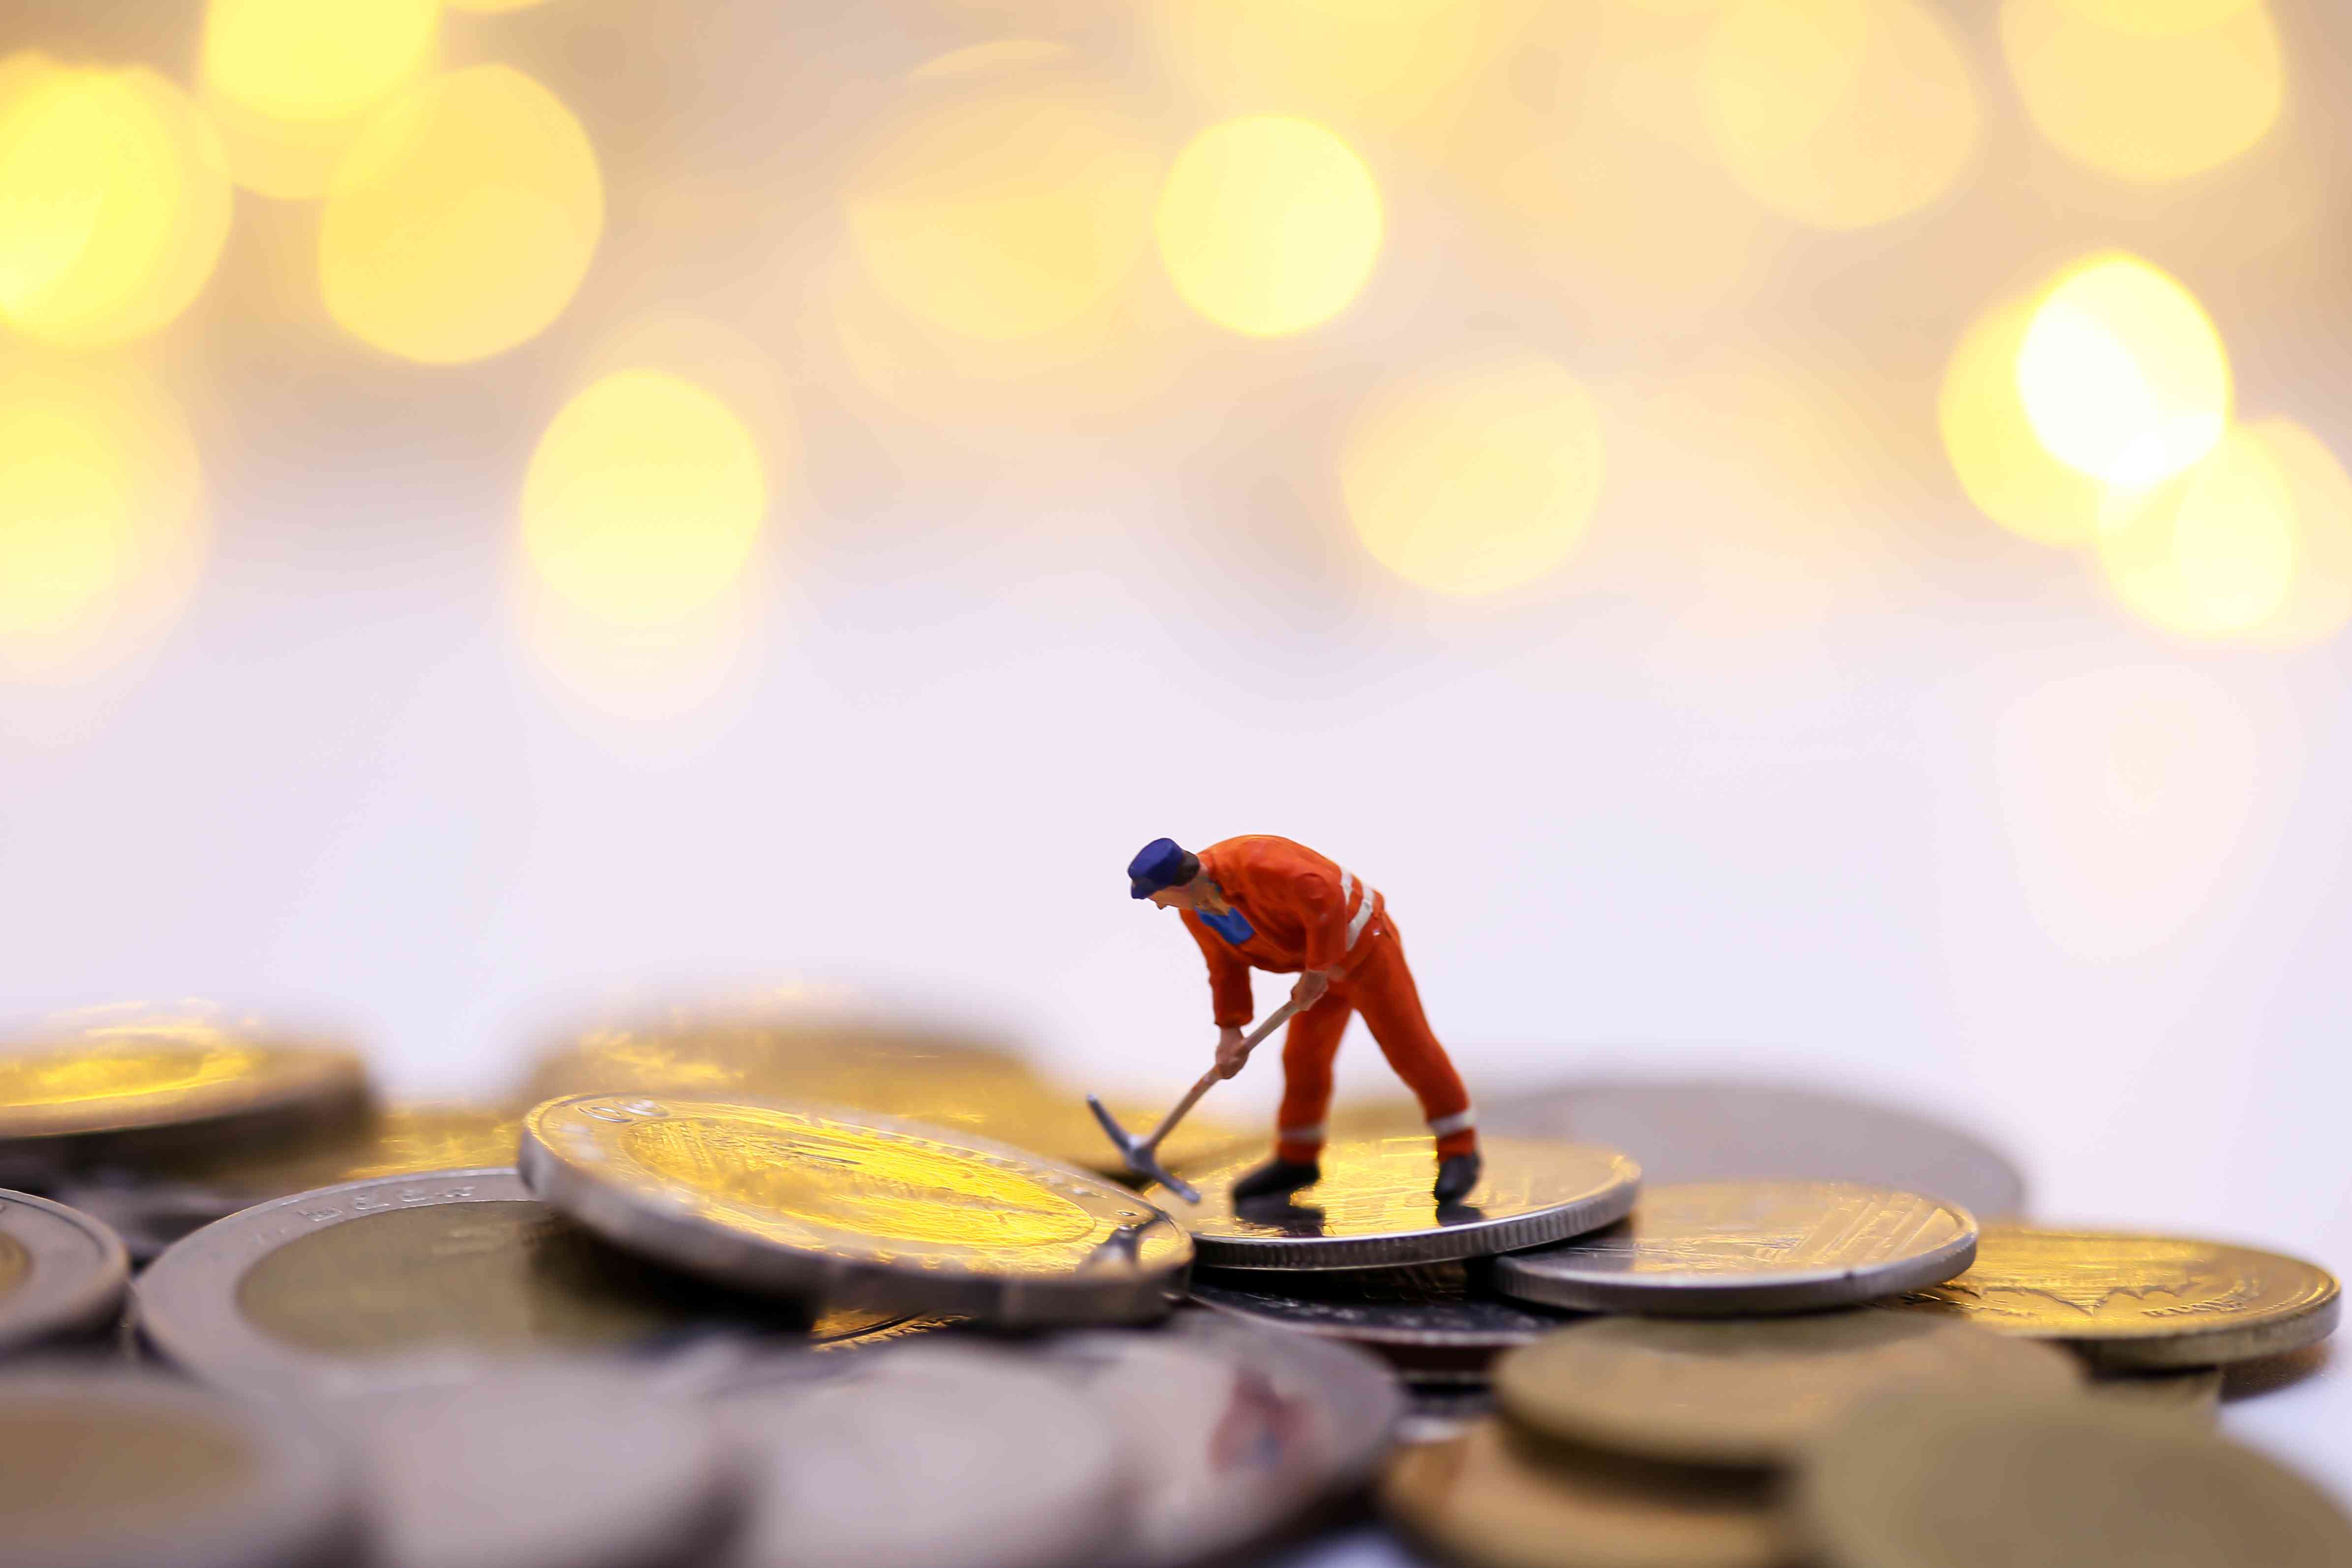 Small worker figurine standing on large coins